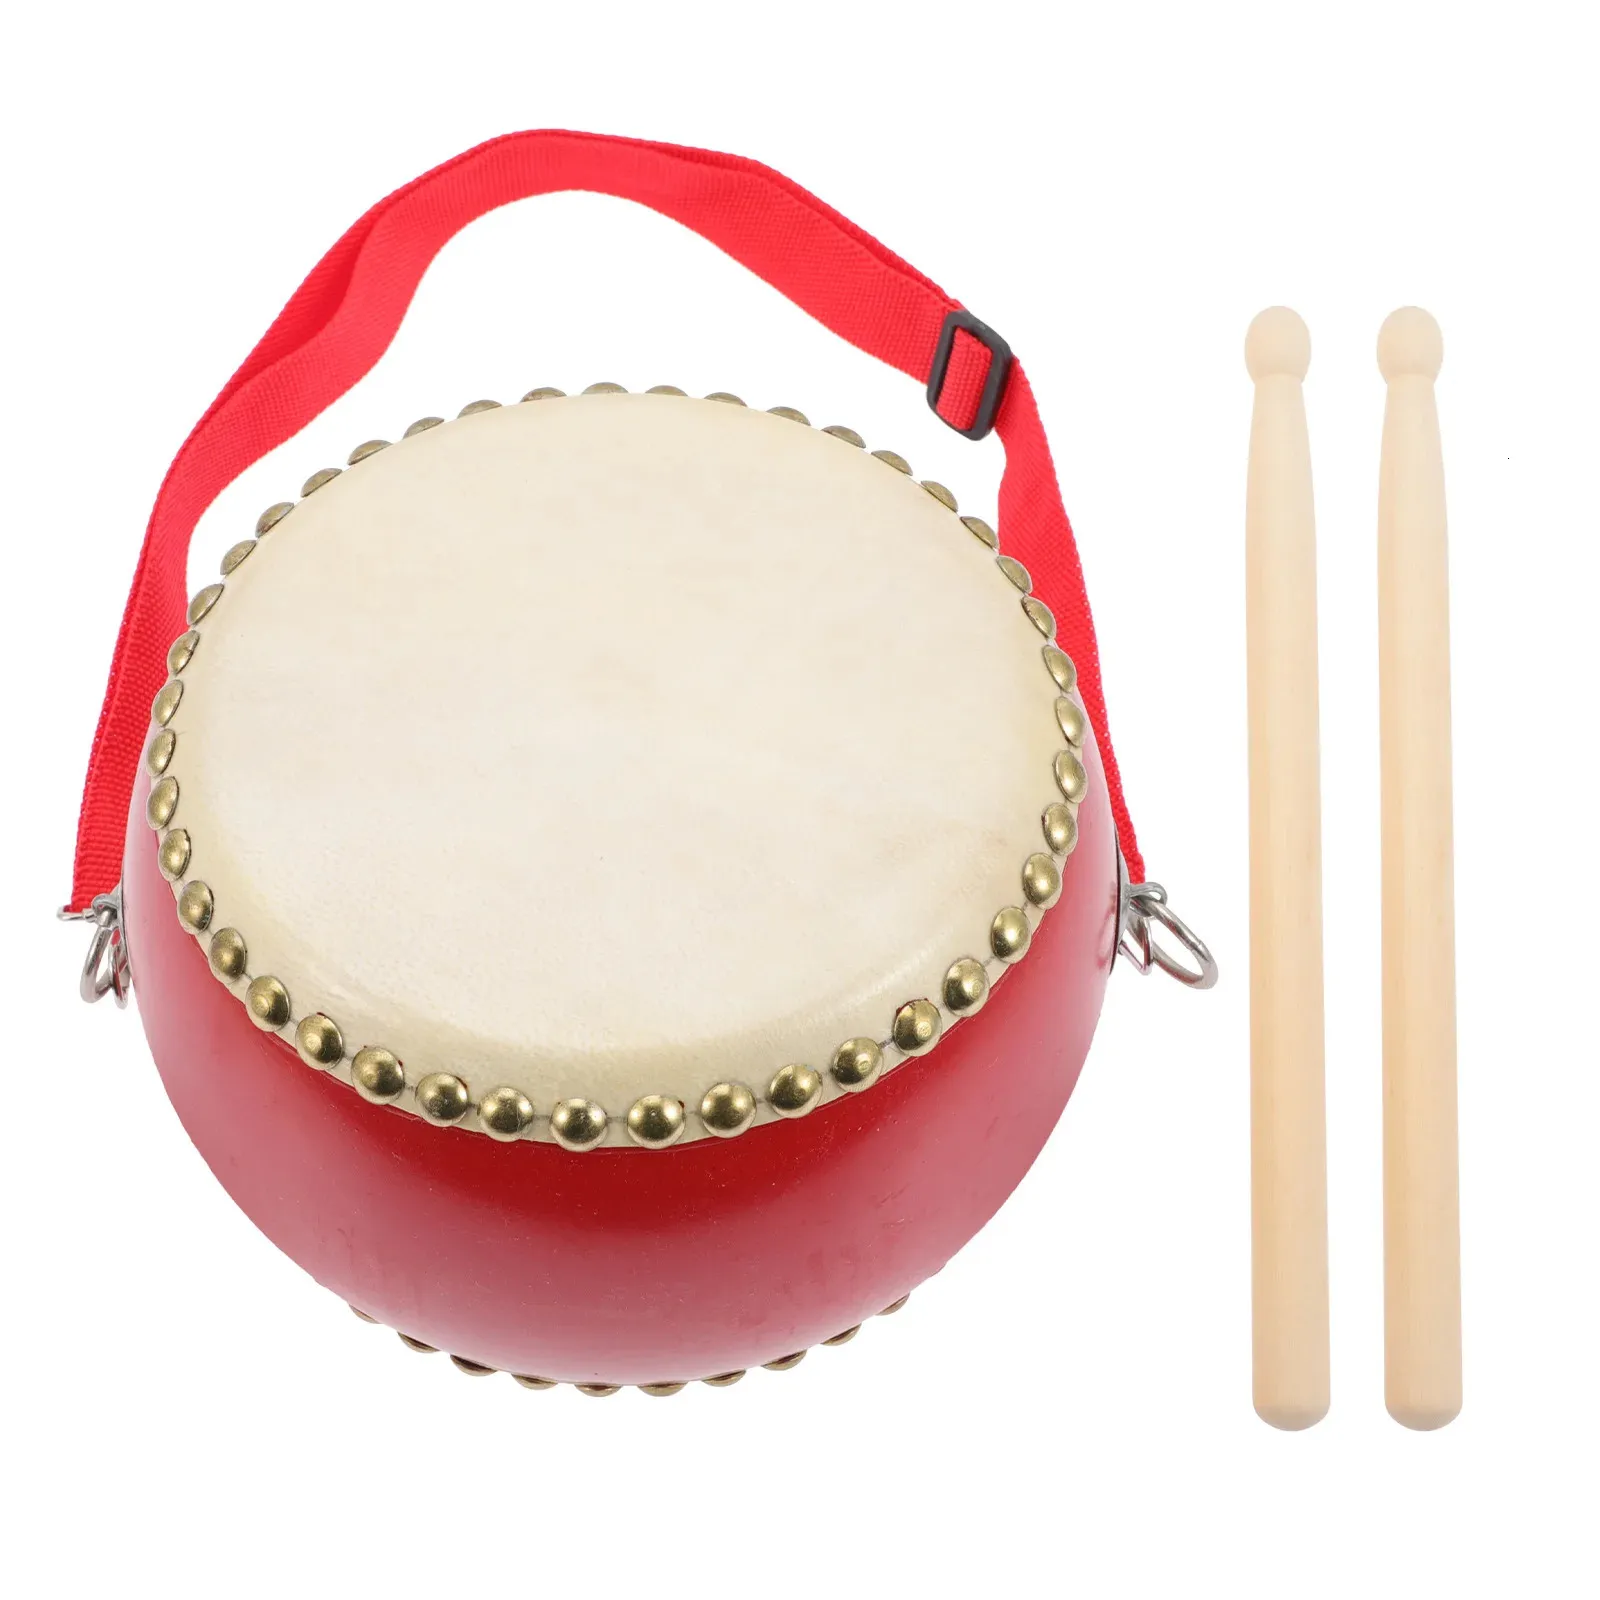 Drum Education Toy Kids Plaything Wood Baby War Children Cowhide Music Instrument Snare Percussion Toddler Wooden Toys Babies 240112